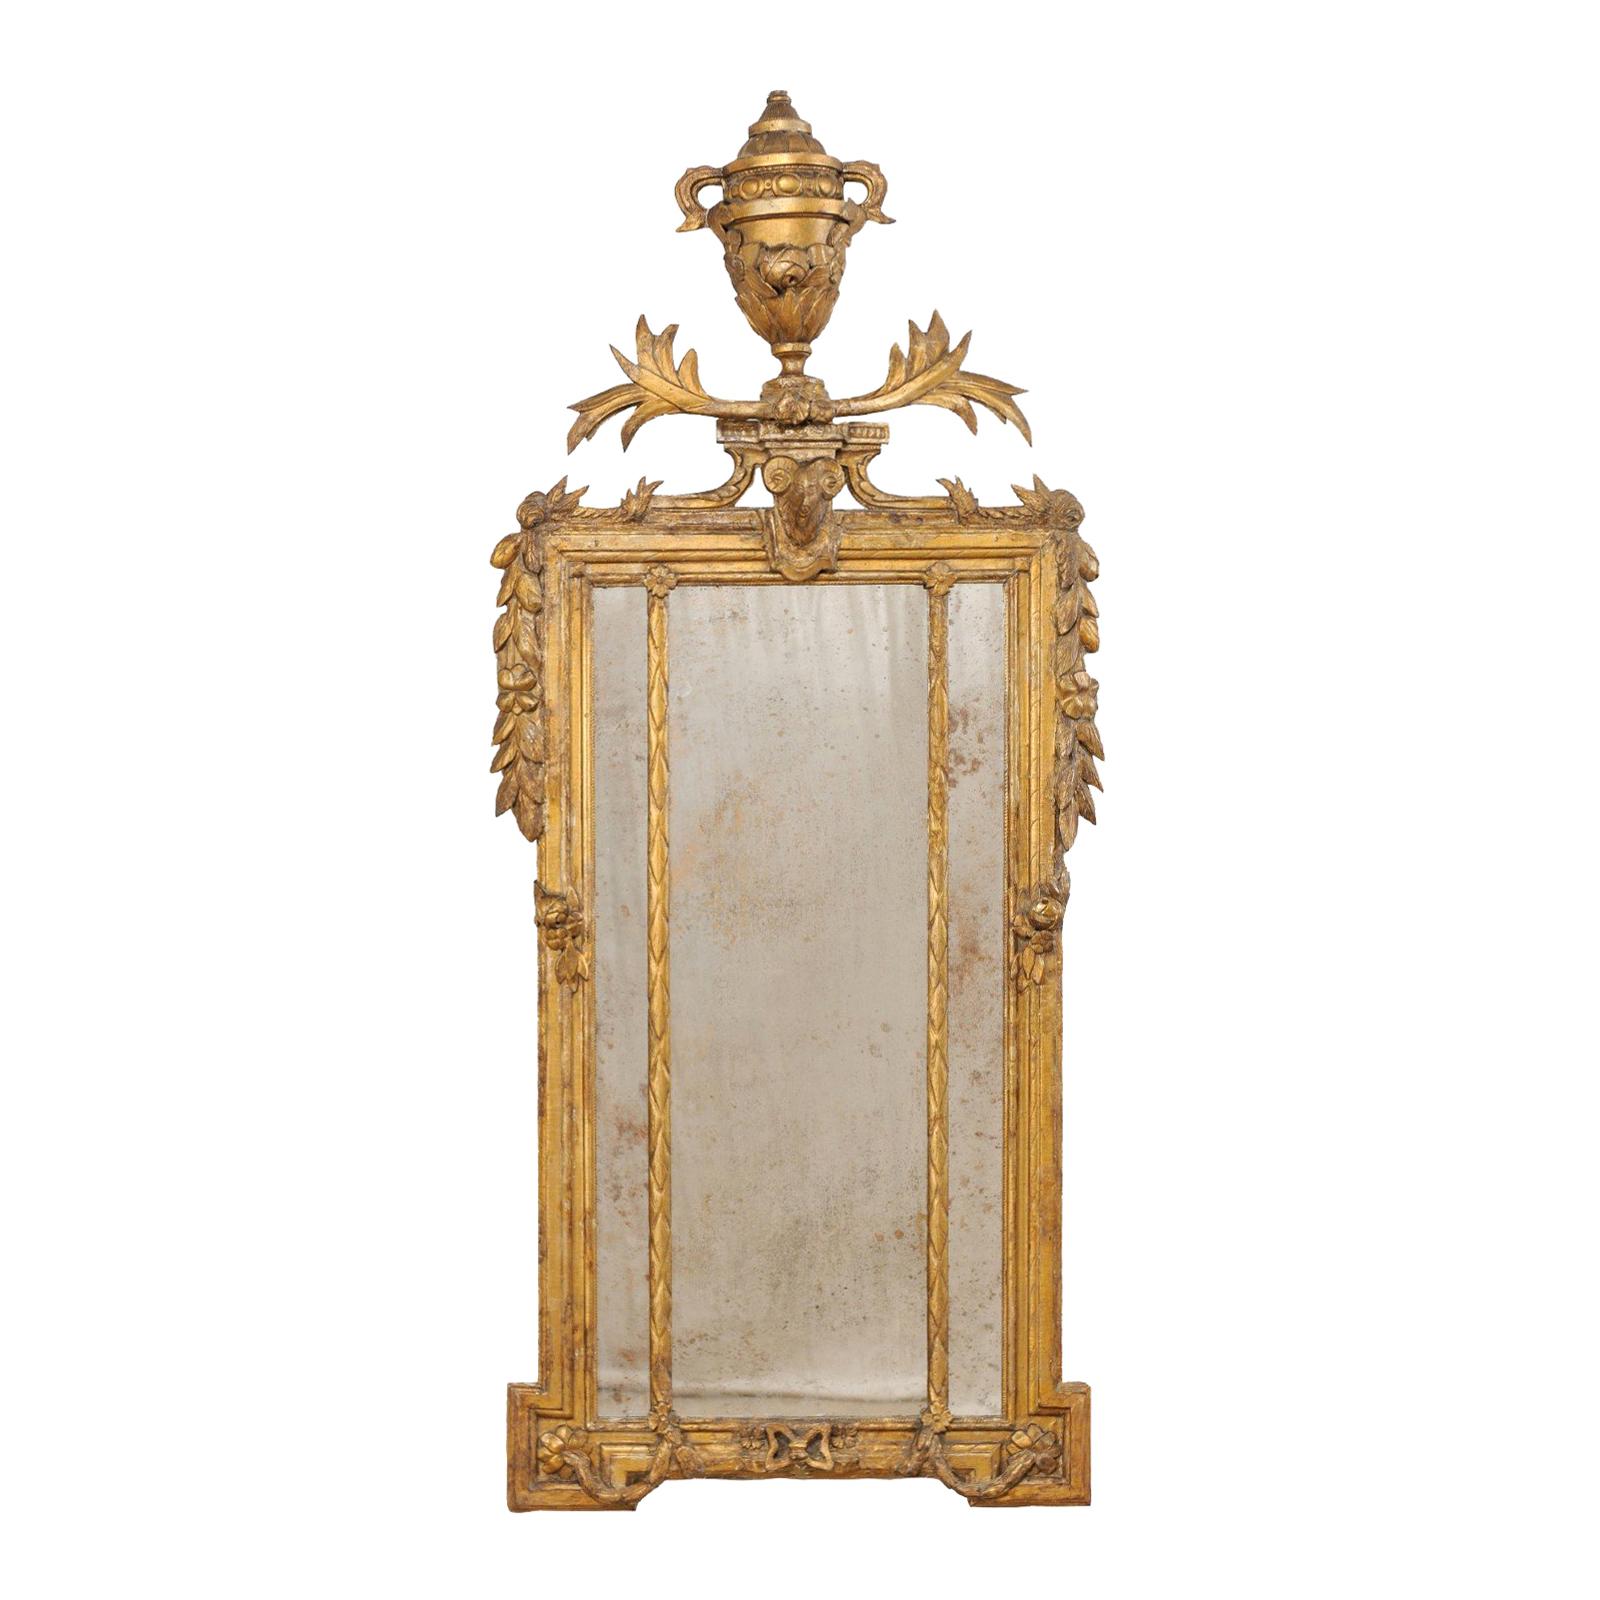 Early 19th Century Italian Neoclassical Gilt and Carved Wood Mirror